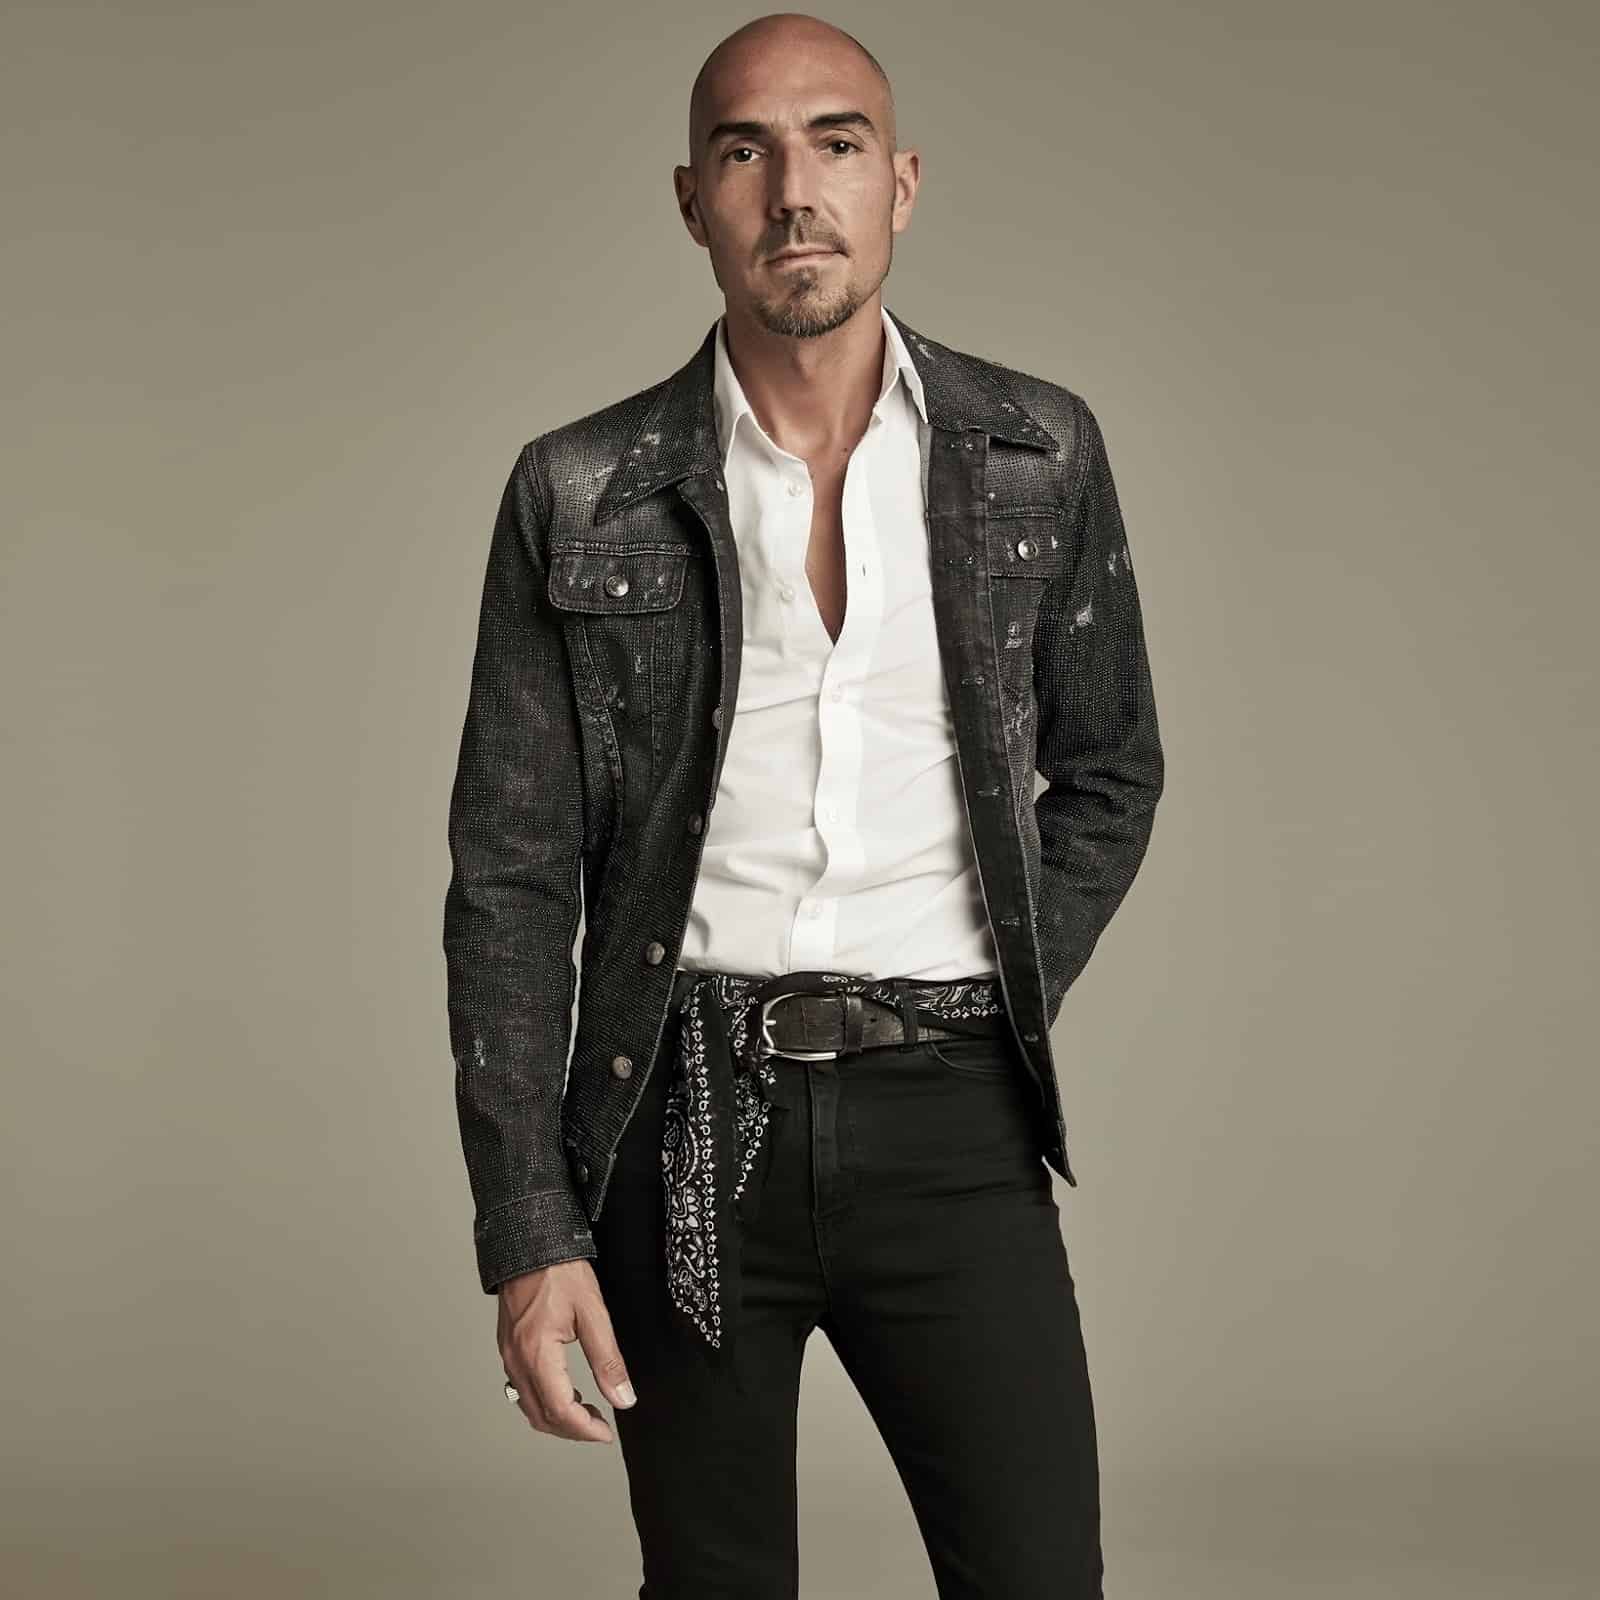 Sam Paganini unveils first singles ‘Bianca / One’ from upcoming album